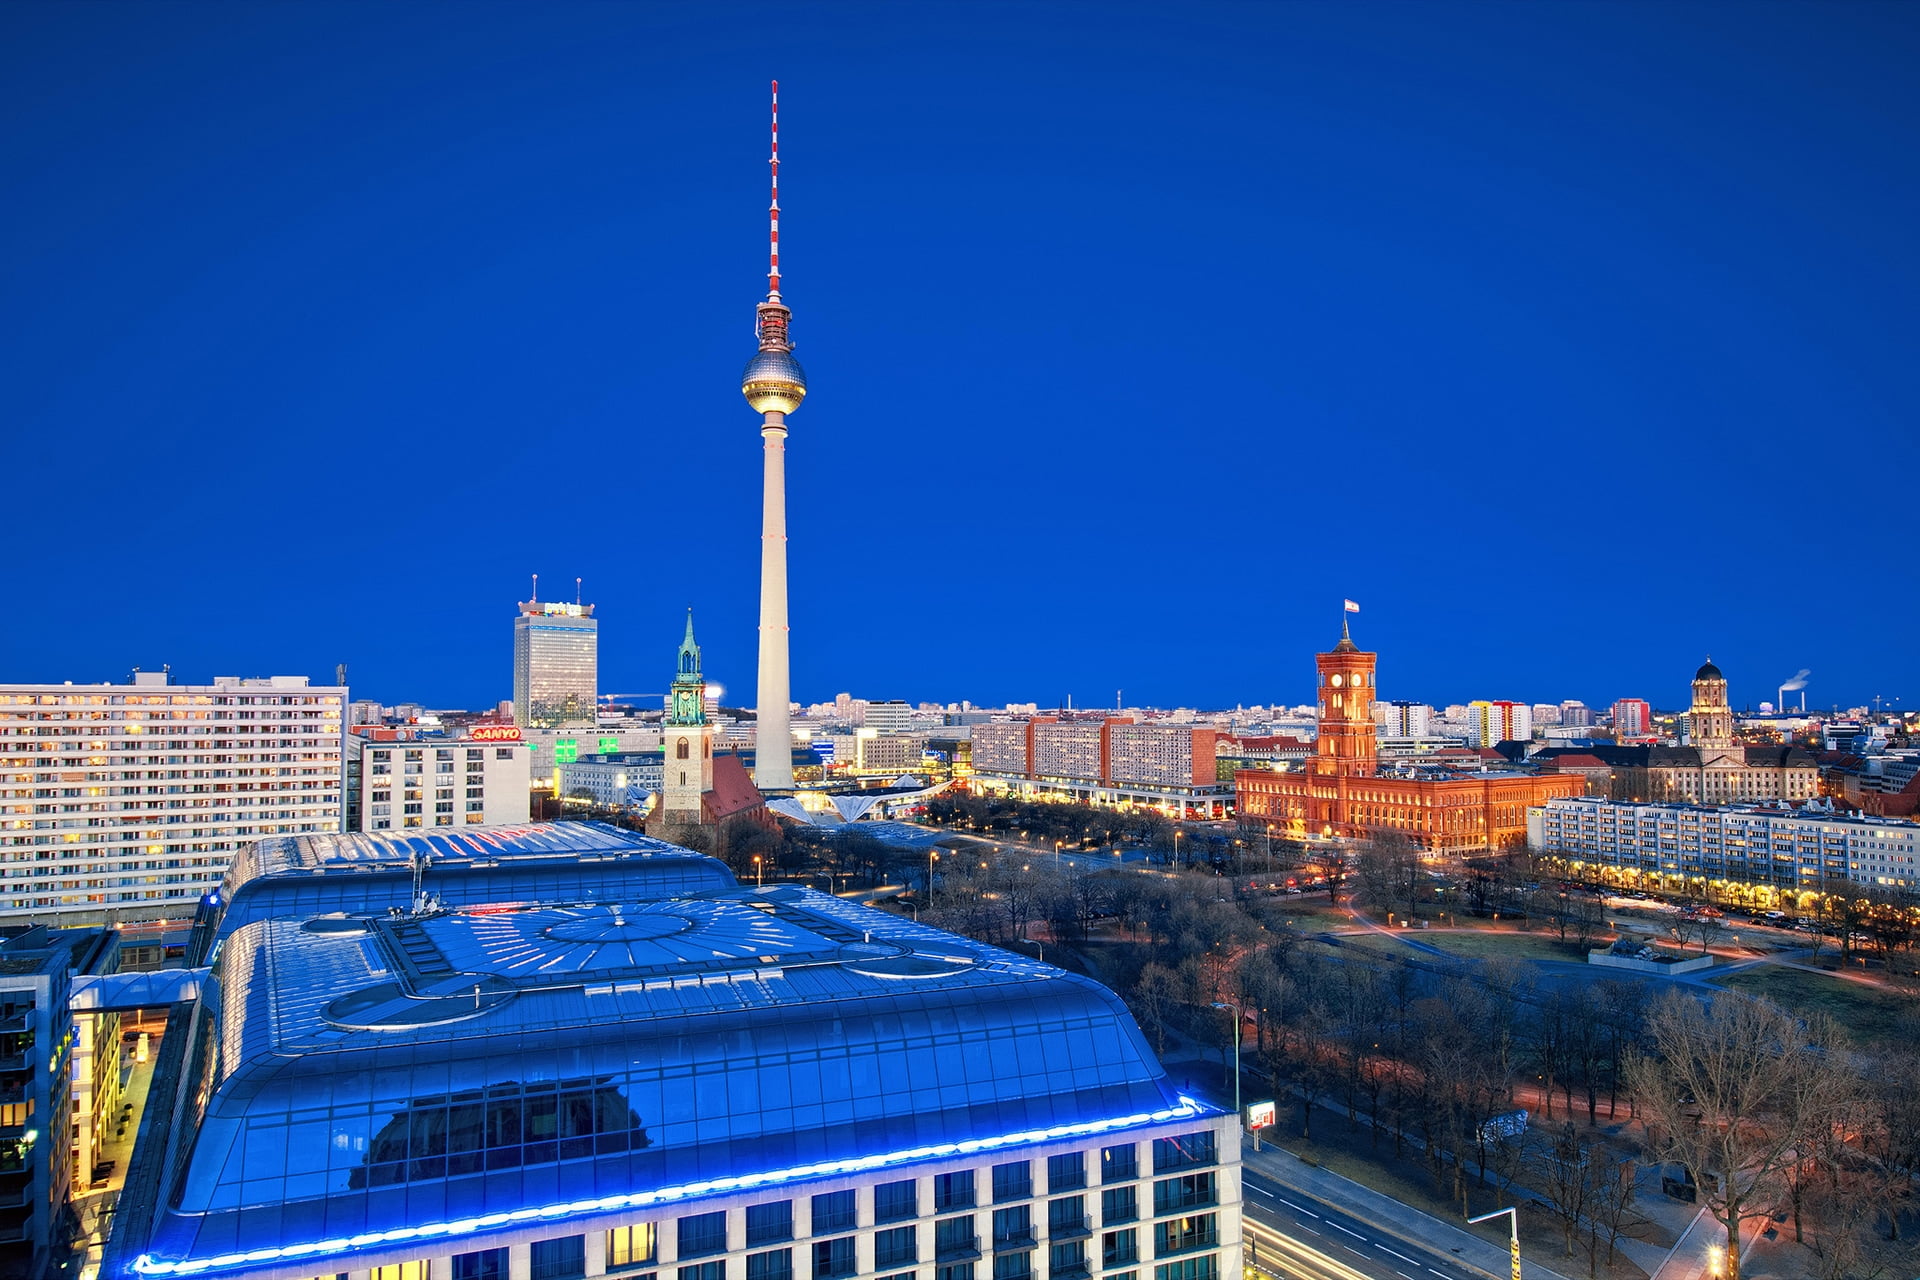 blue building, berlin, city, roads, houses, night, television Tower - Berlin